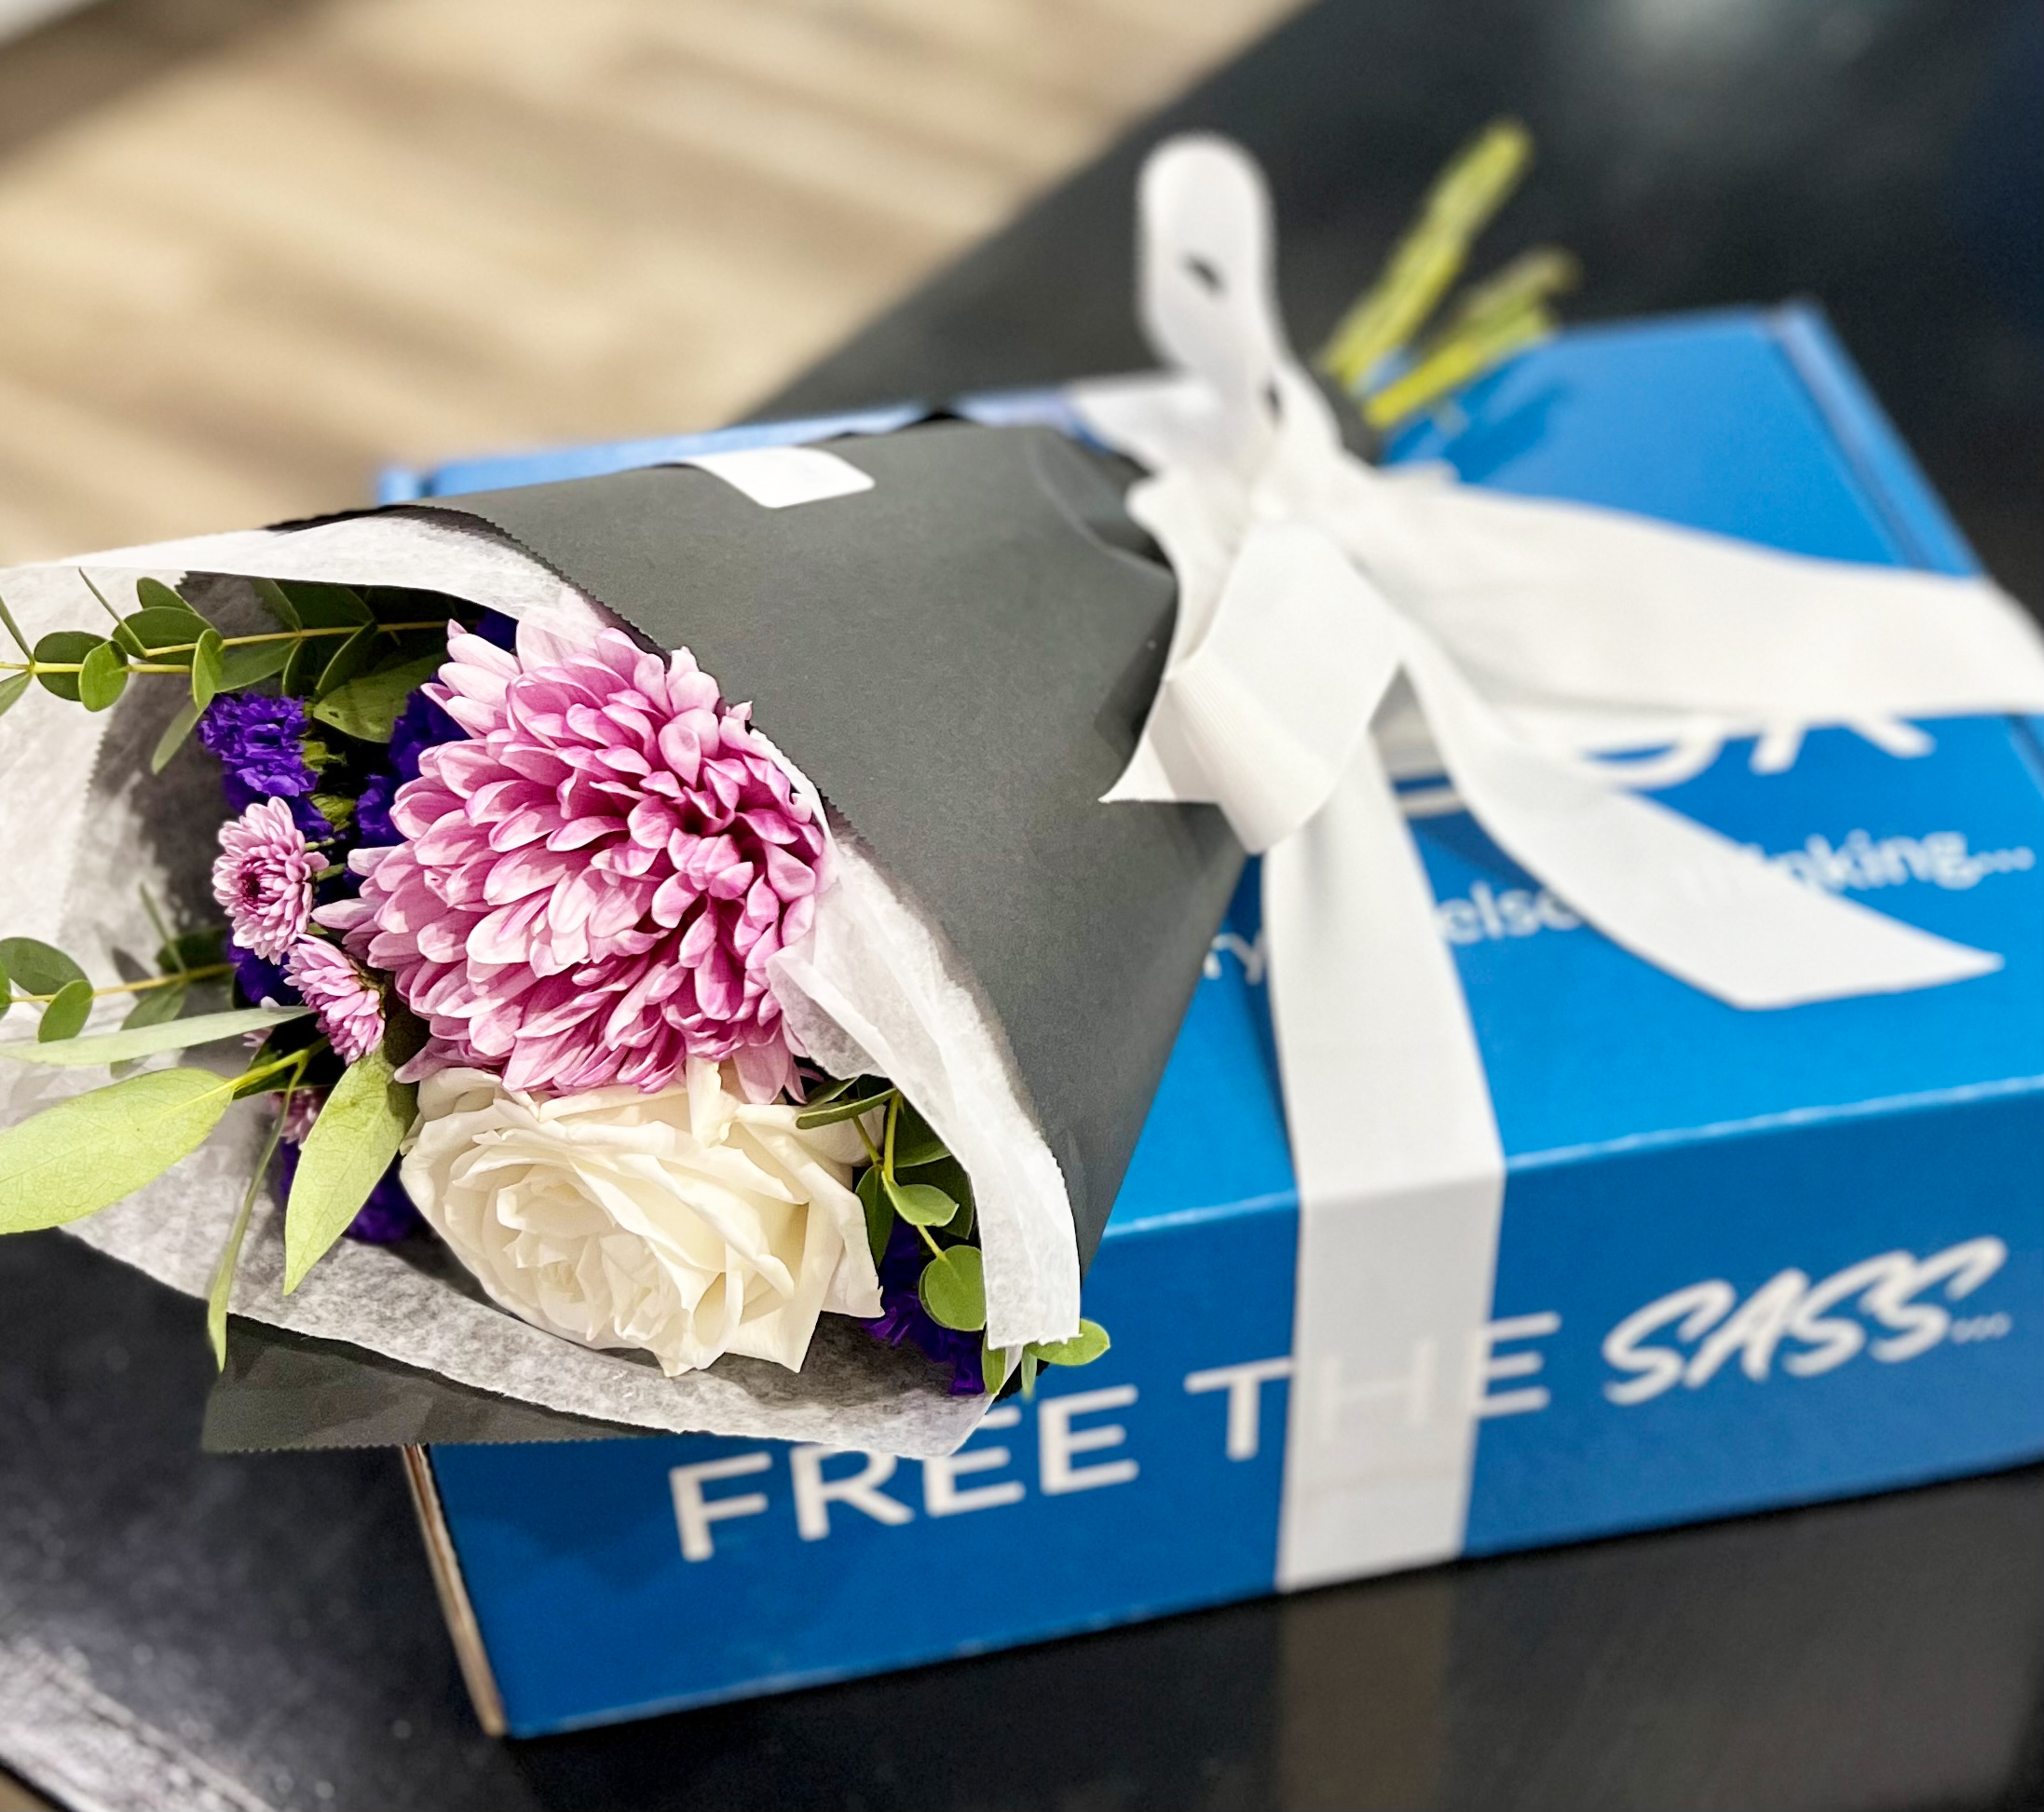 A bouquet of flowers on a small teal box